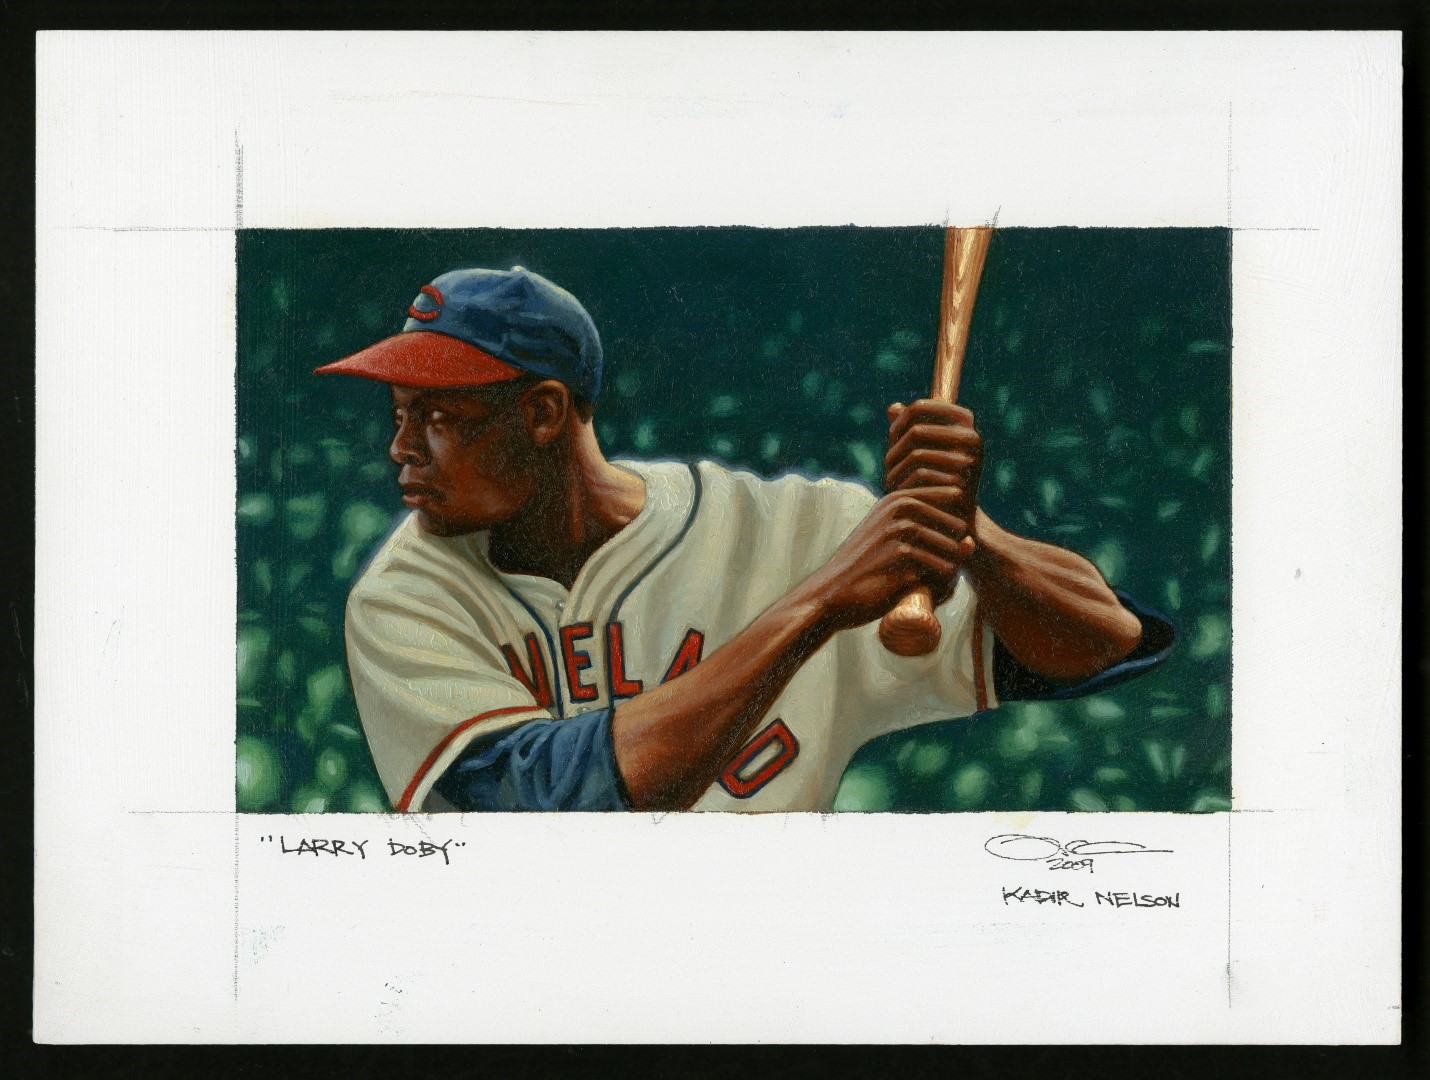 A close-up painting of baseball player Larry Doby’s upper body in a baseball uniform. He grips a baseball bat and stares determinedly forward in anticipation of a pitch. An abstract depiction of a stadium crowd in green hues is visible in the background.